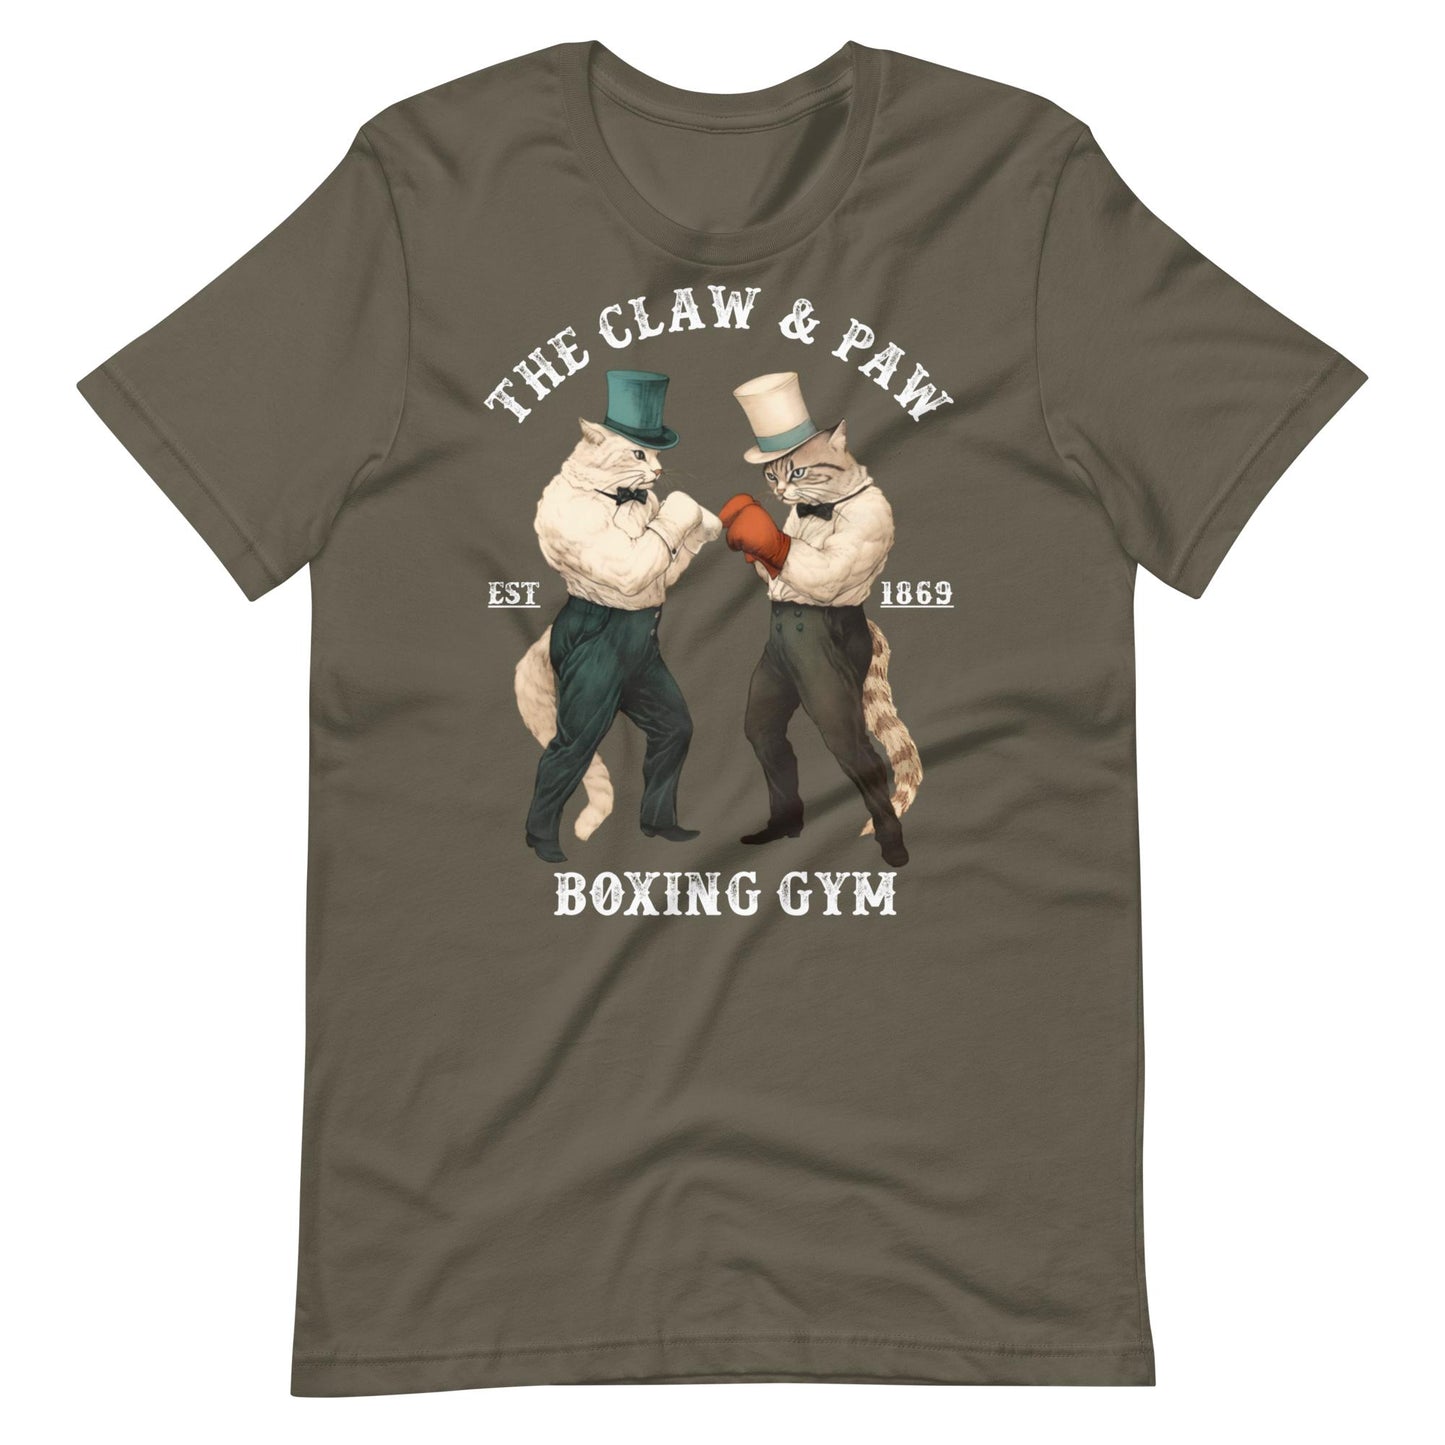 The Claw & Paw Boxing Gym T-Shirt